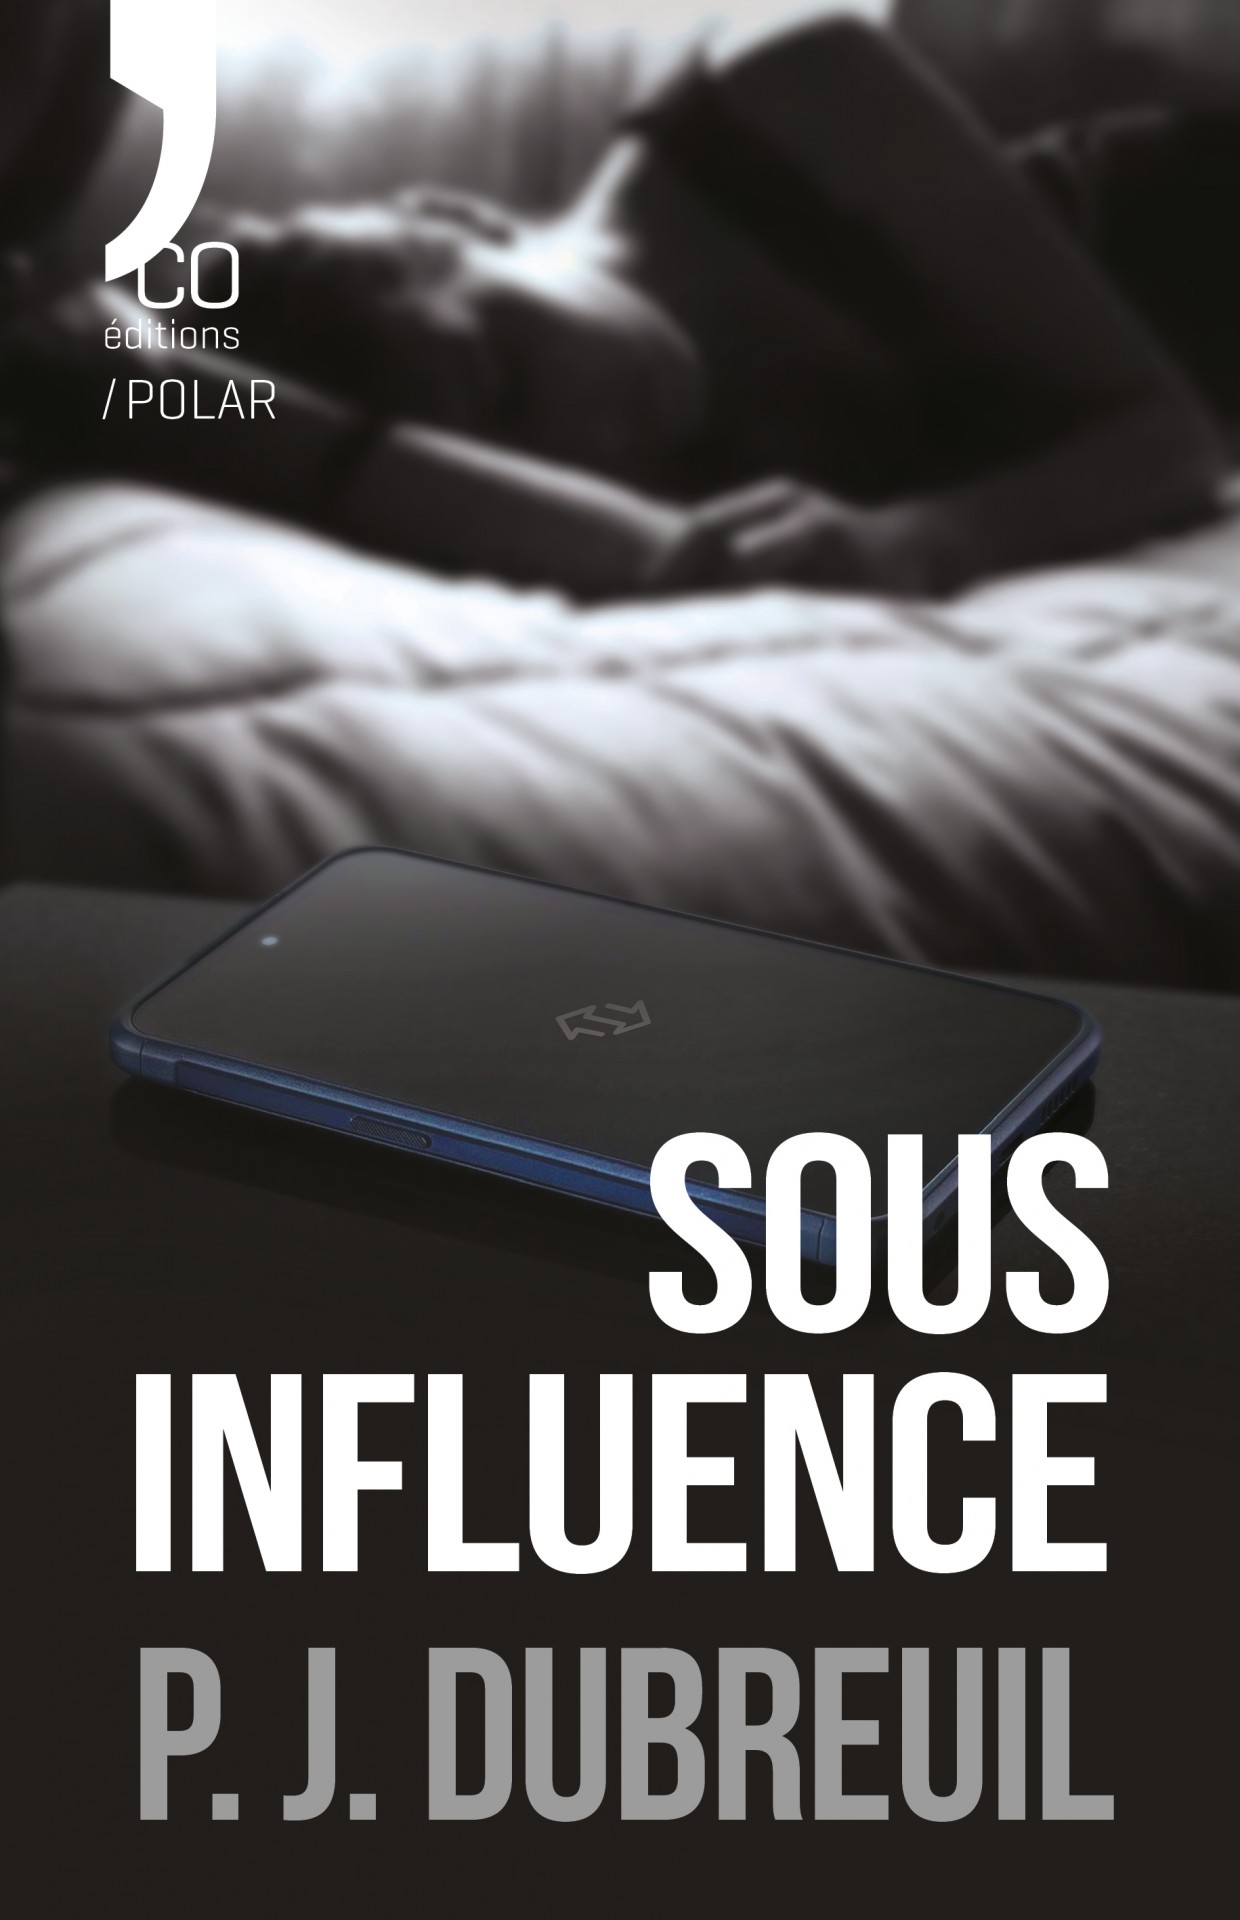 N co sous influence paul dubreuil 155x240 couv